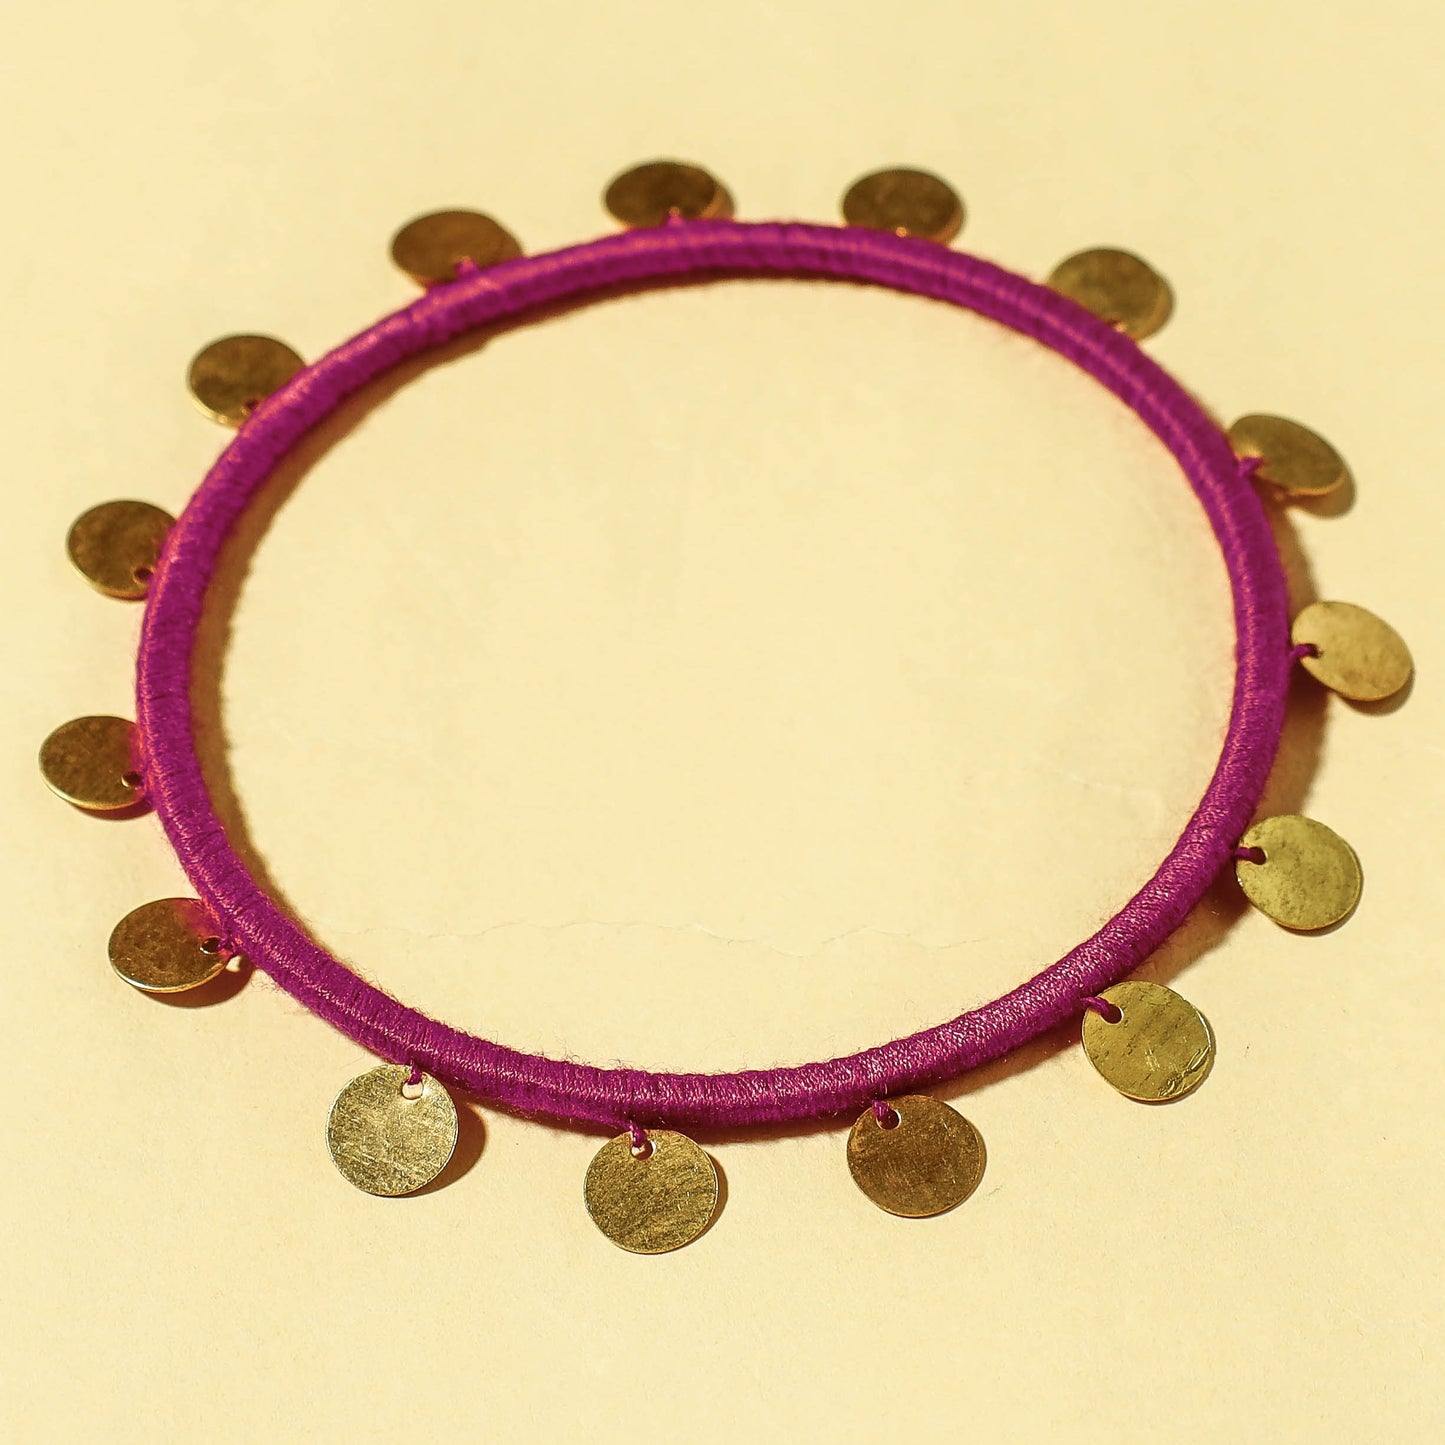 Handcrafted Patwa Thread & Sequin Work Bangle (Size - 2-8)